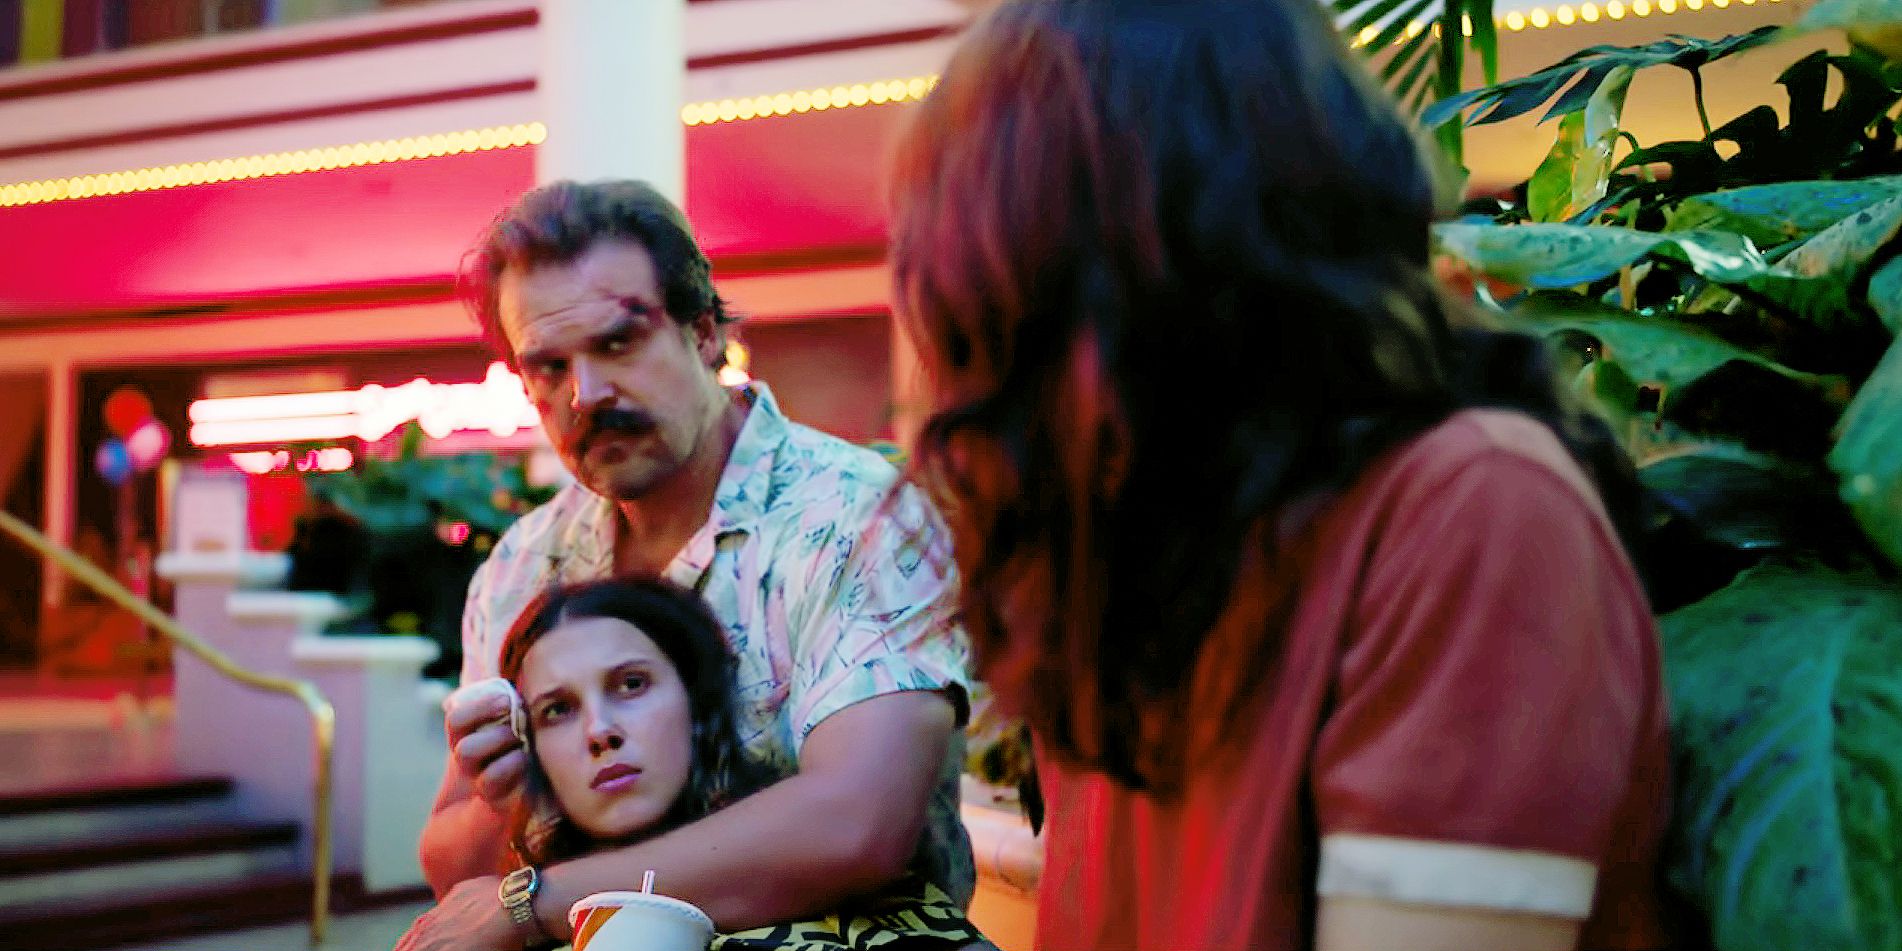 Joyce and Hopper Share a Look While Taking Care of Eleven on Stranger Things